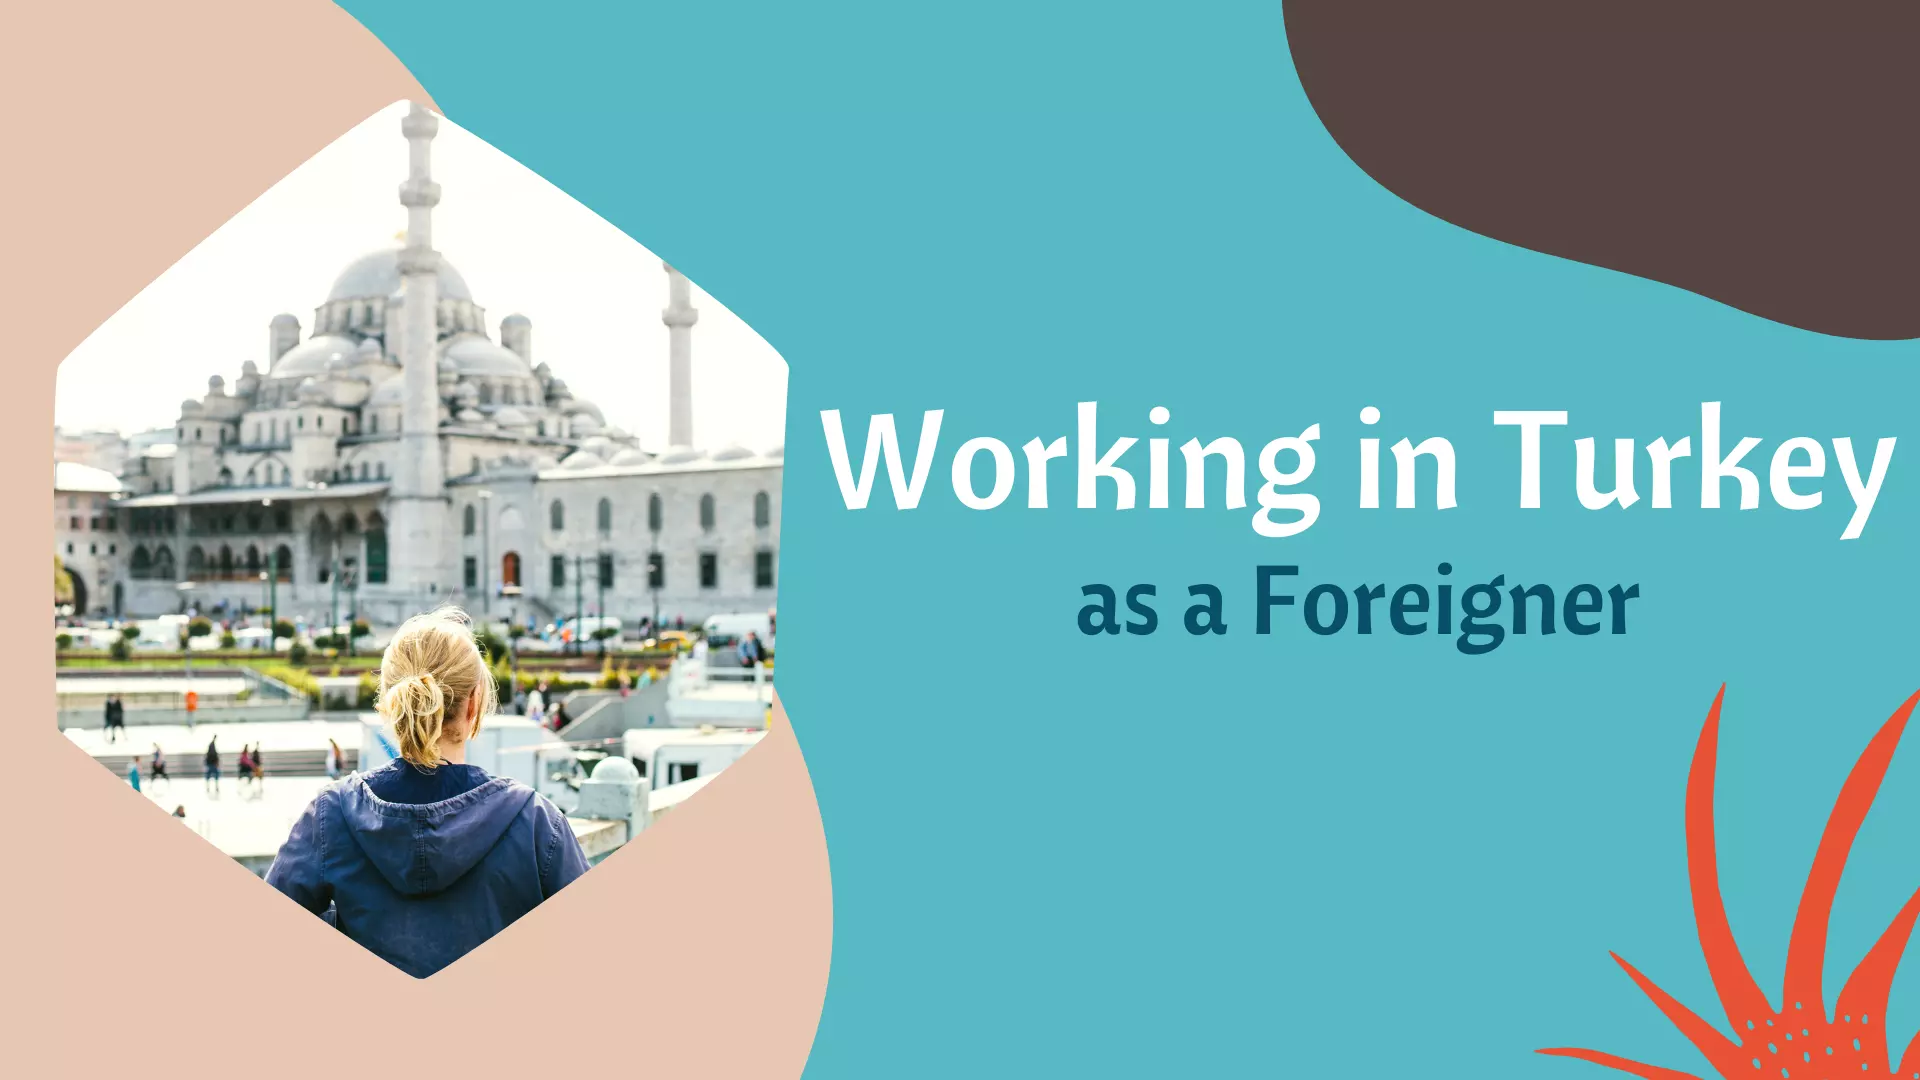 Working in Turkey as a Foreigner